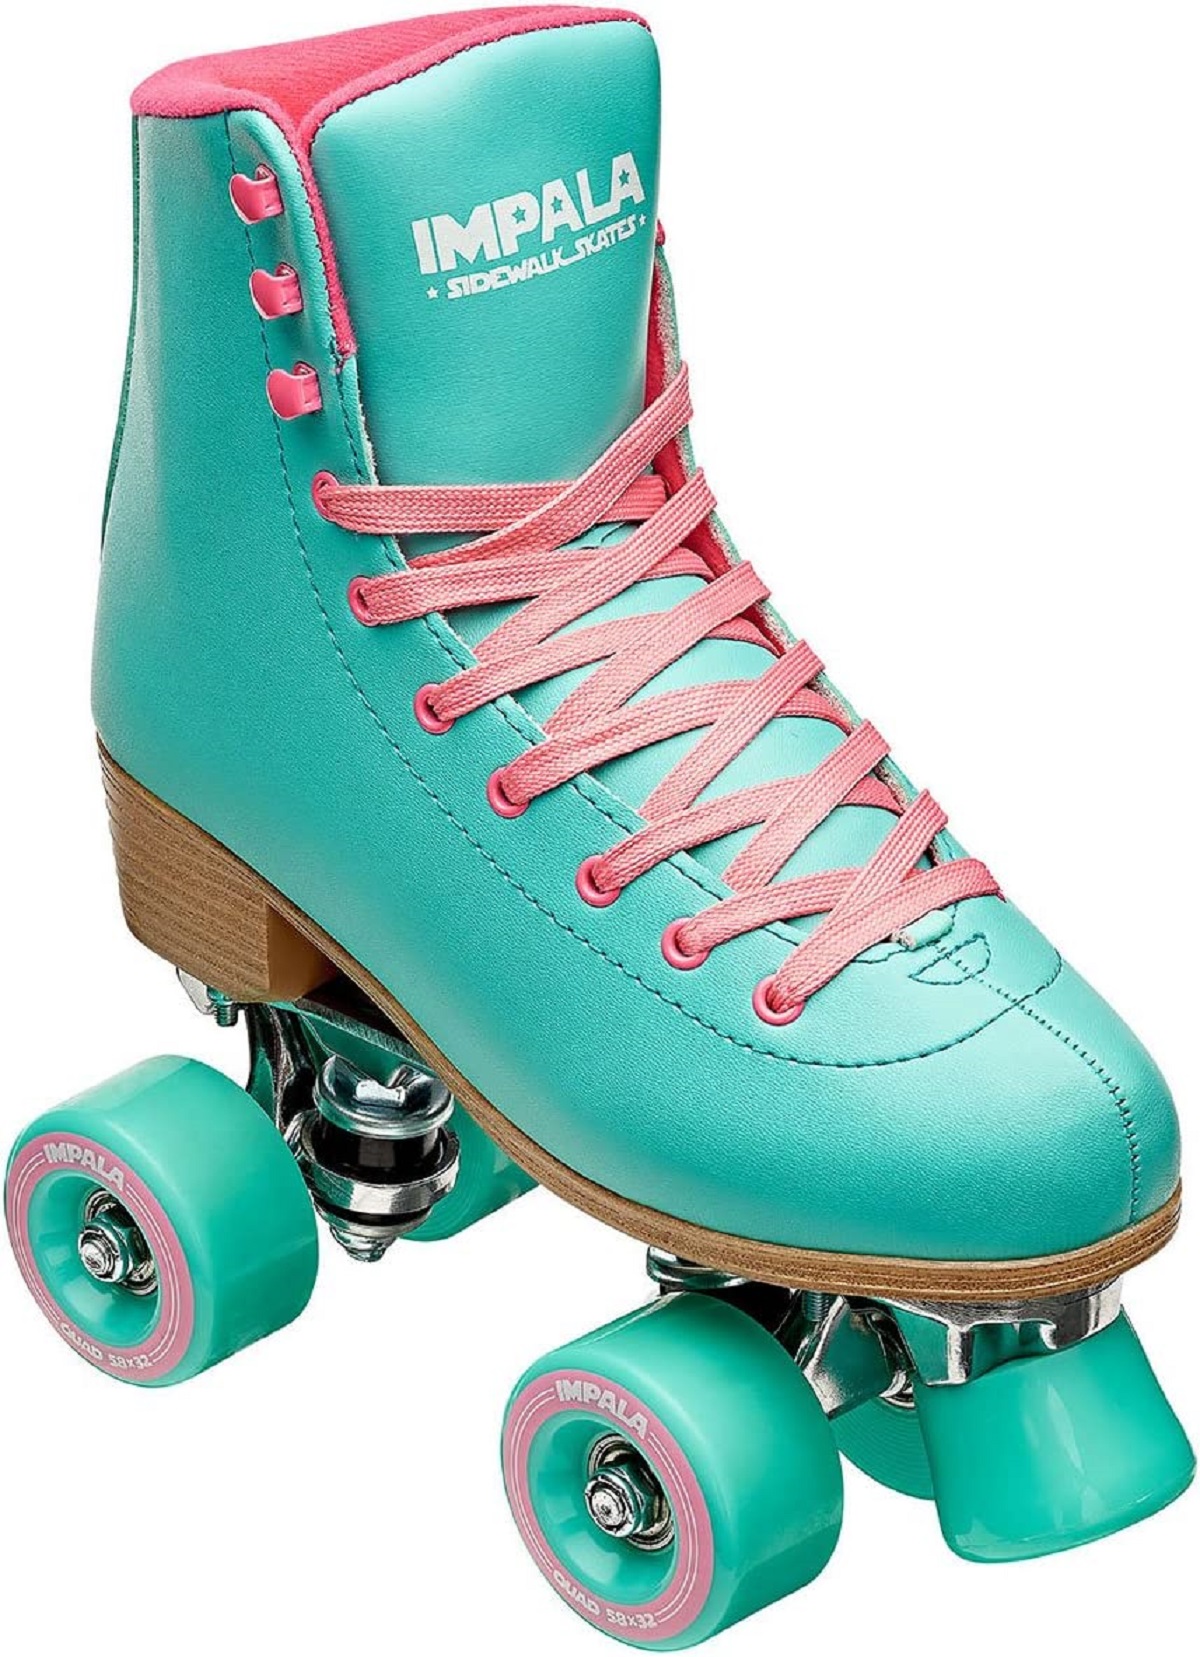 pink-and-teal-lace-up-boot-style-roller-skates-for-women